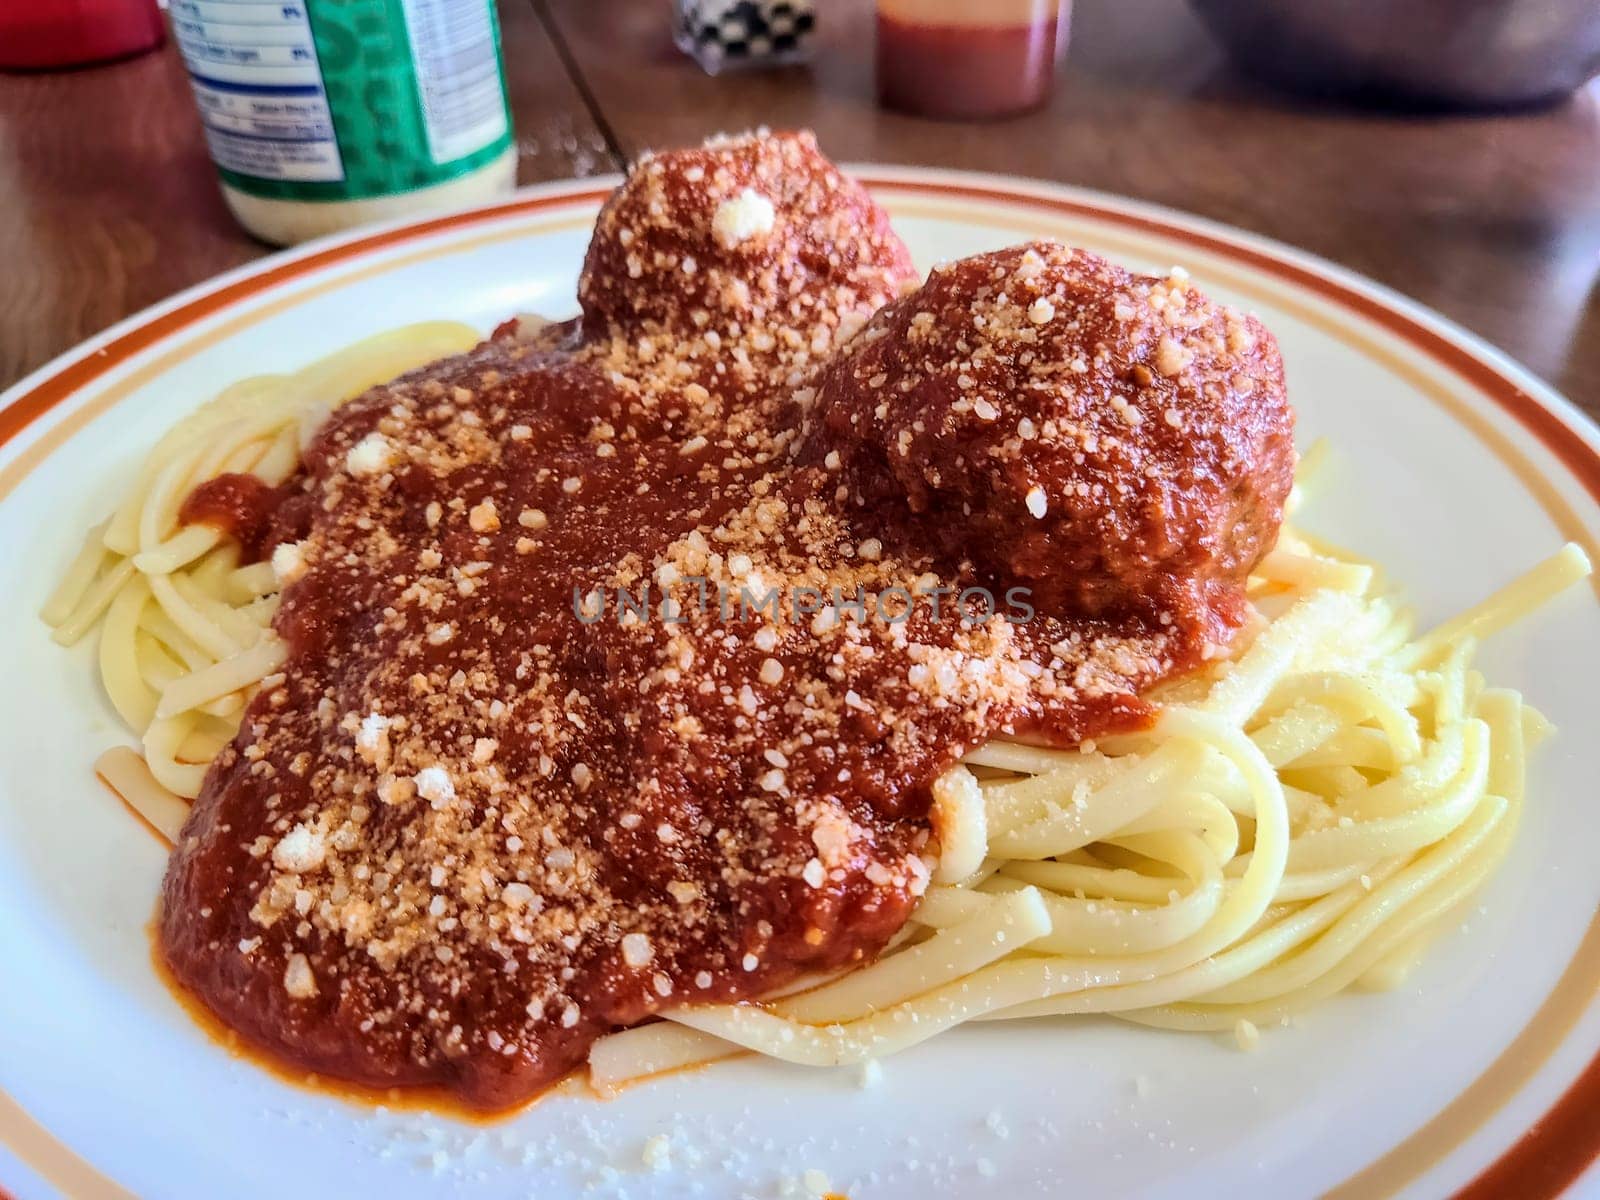 Hearty homemade spaghetti and meatballs on a rustic plate, garnished with parmesan, perfect for a family dinner.